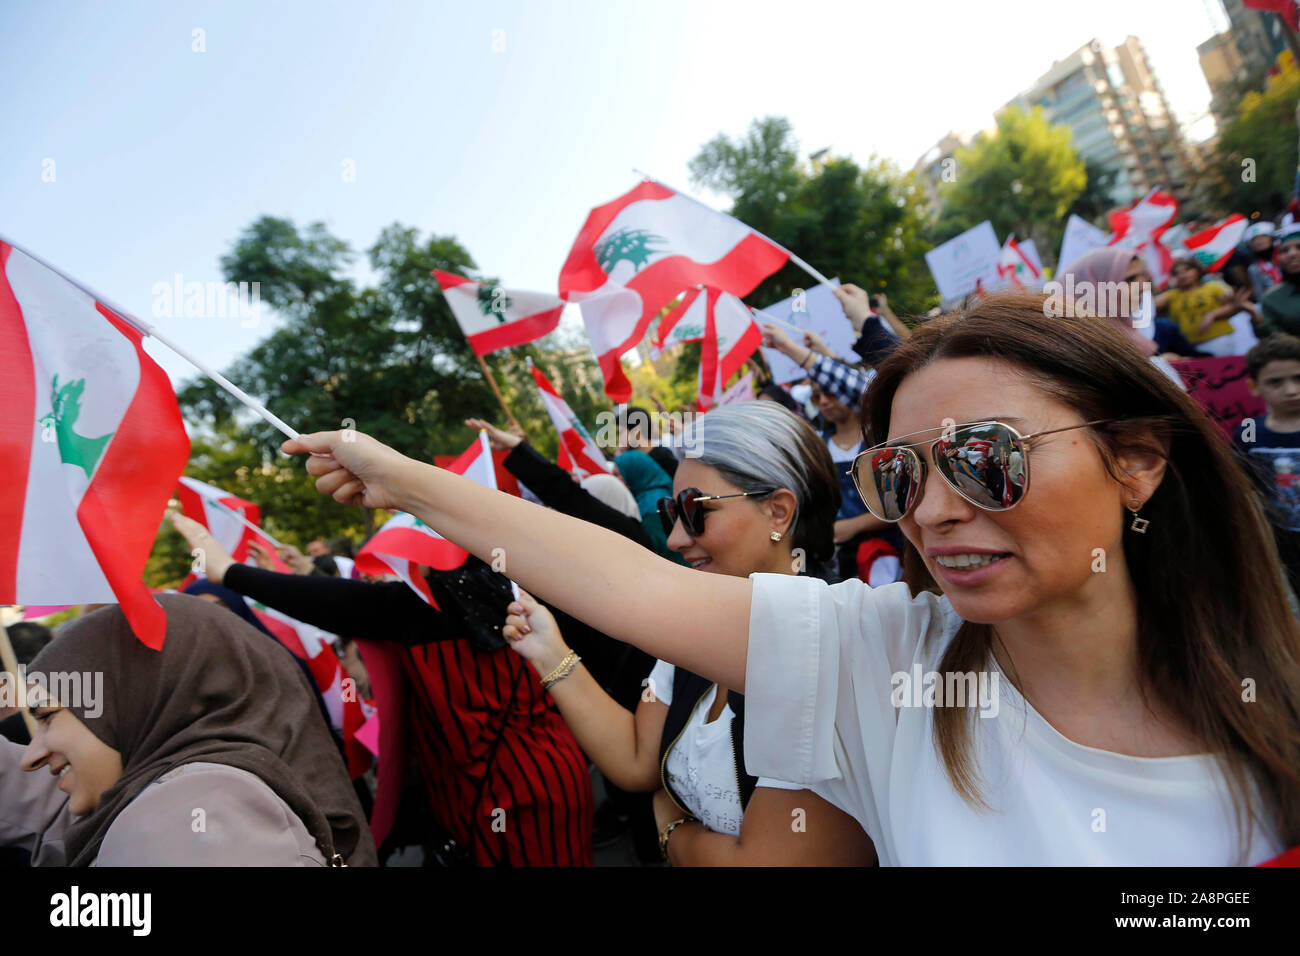 Beirut, Lebanon. 10th Nov, 2019. People take part in a protest against the government's policies in Beirut, Lebanon, on Nov. 10, 2019. Credit: Bilal Jawich/Xinhua/Alamy Live News Stock Photo